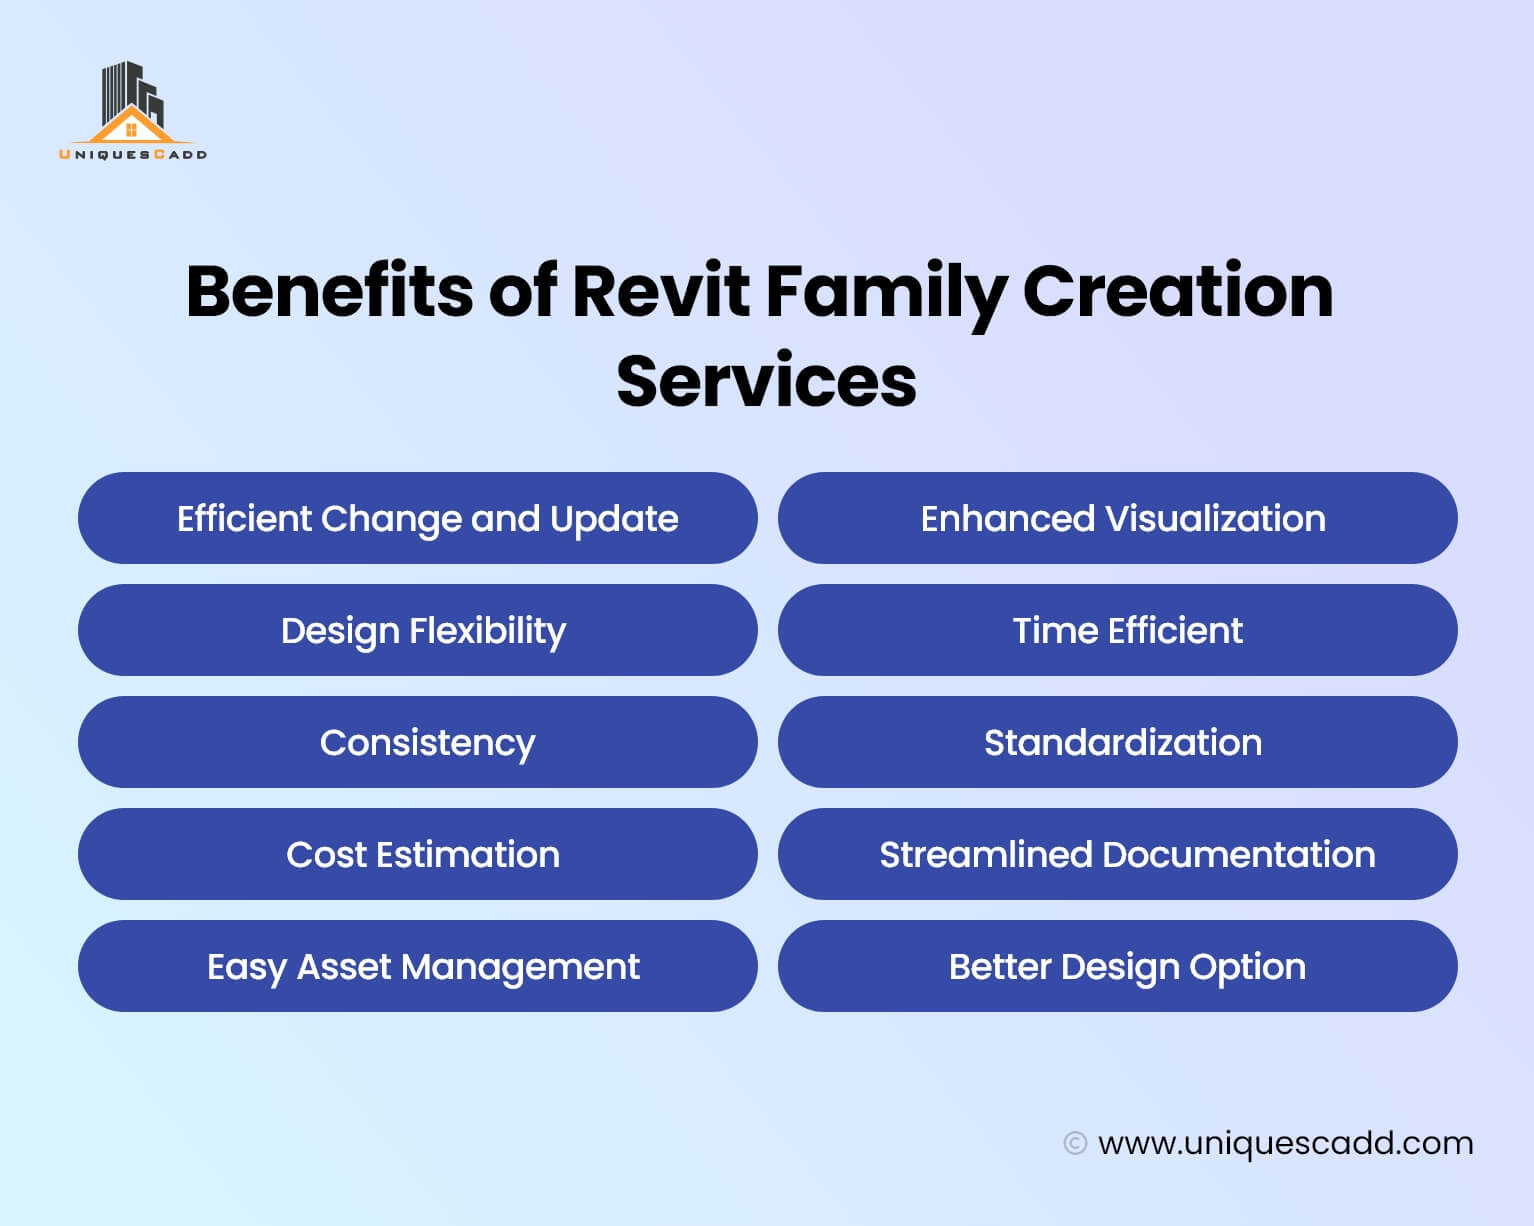 Benefits of Revit Family Creation services